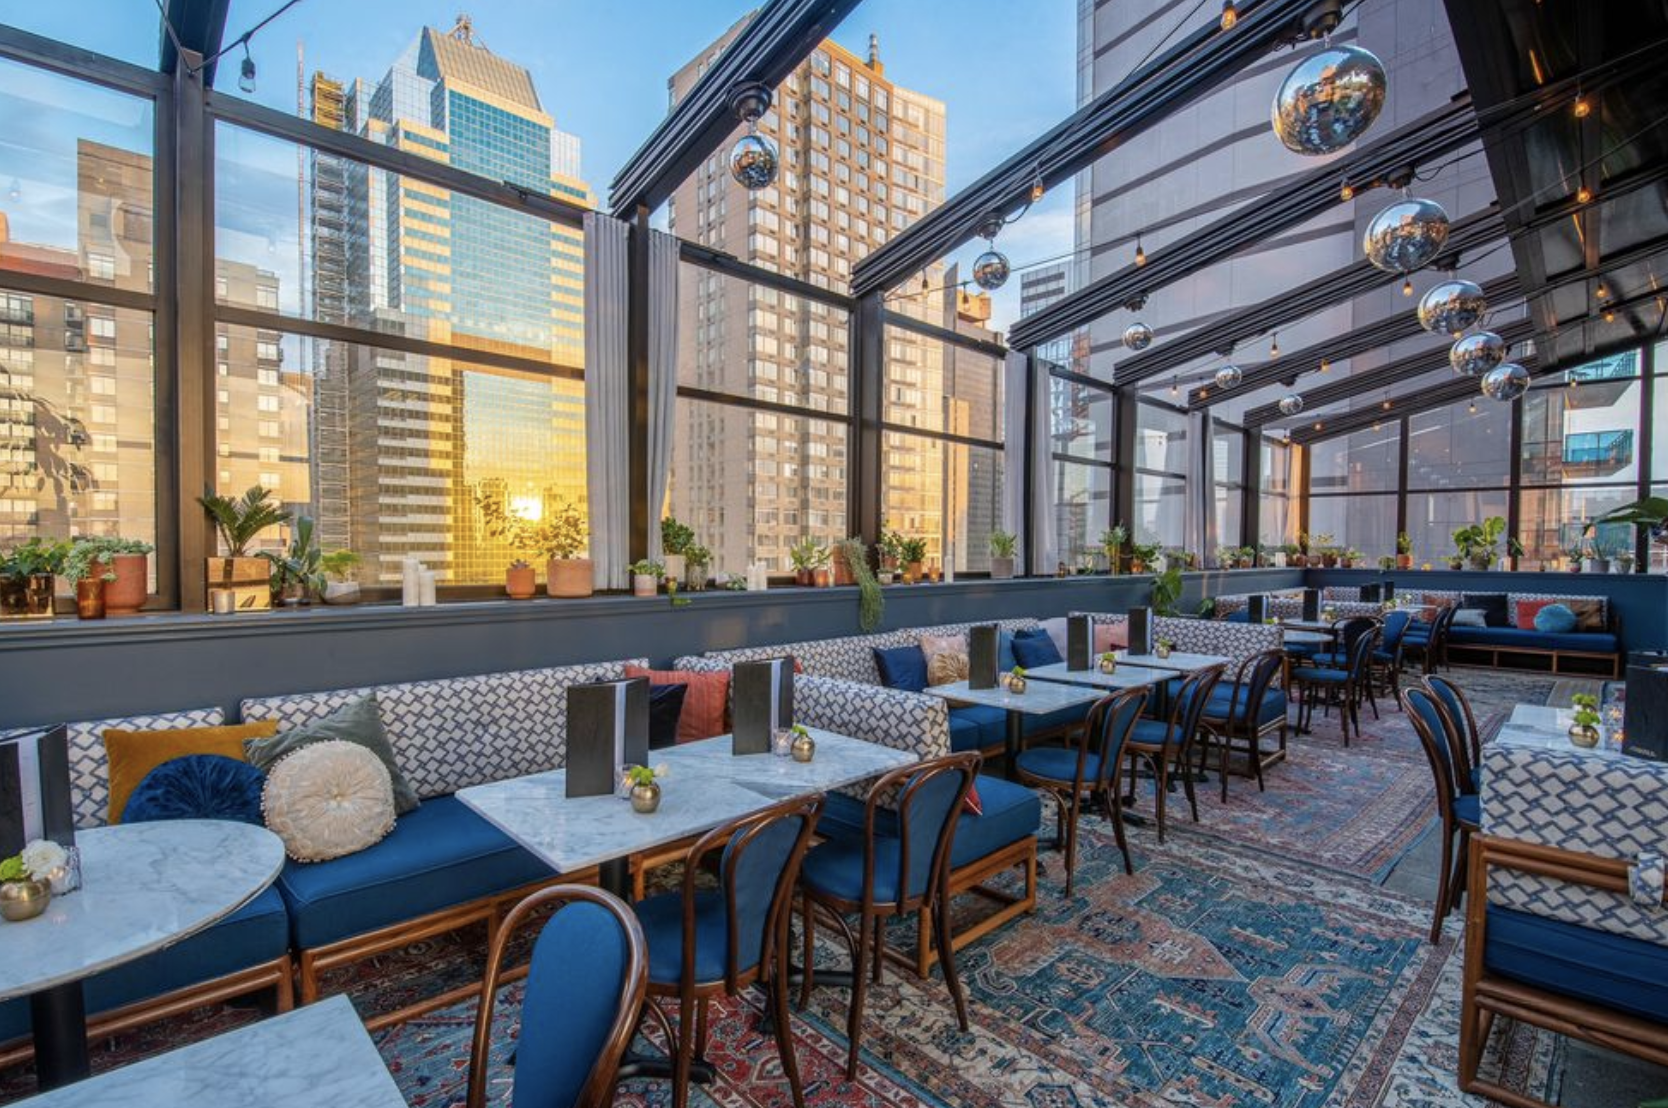 11 of the Best Rooftop Bars in NYC With Unforgettable Views